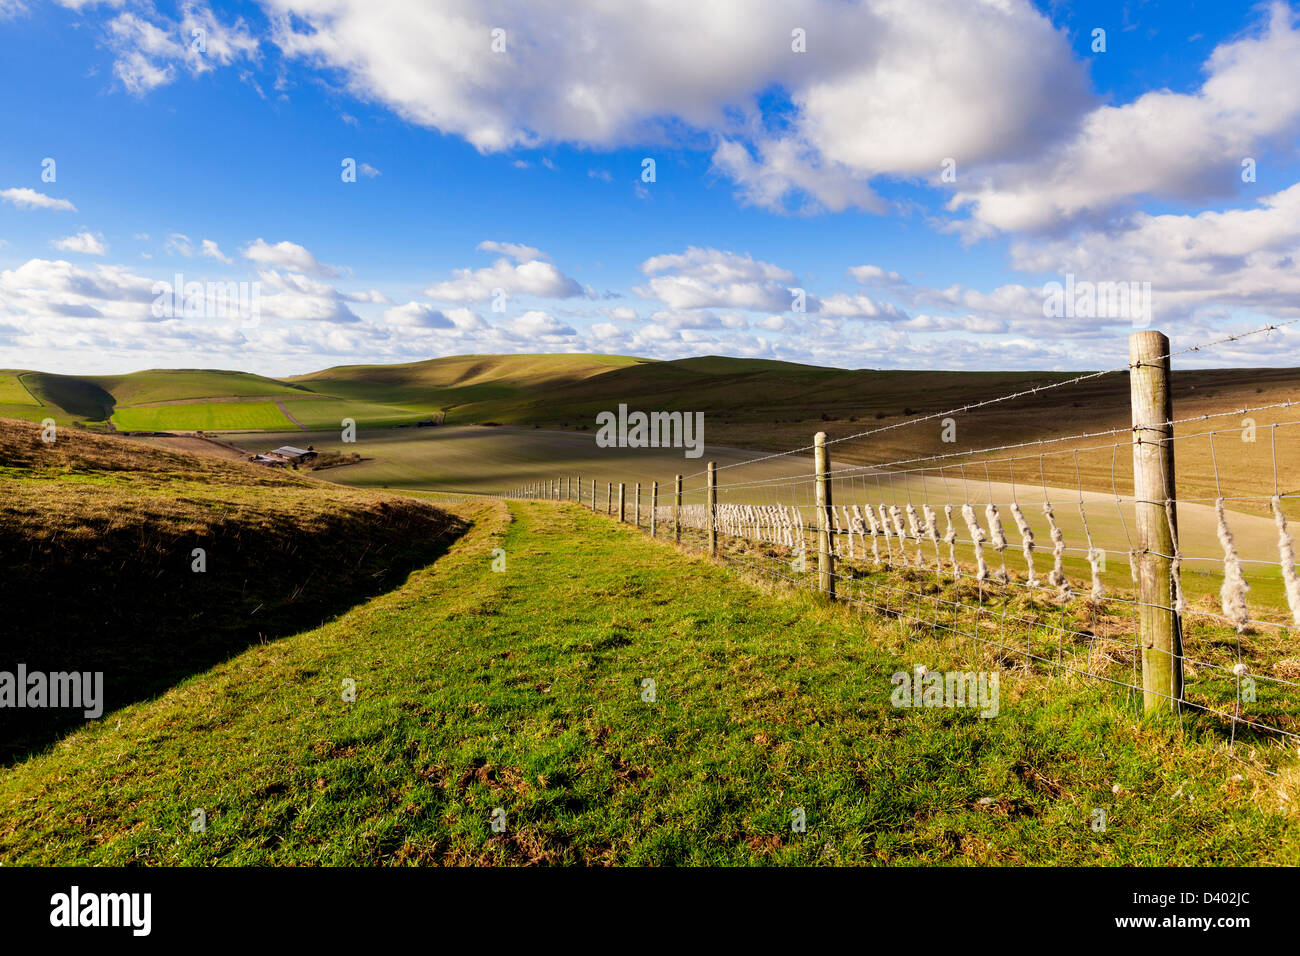 A wide grassy track and a barbed wire fence set amongst rolling green hills on the Pewsey Downs in Wiltshire, UK Stock Photo